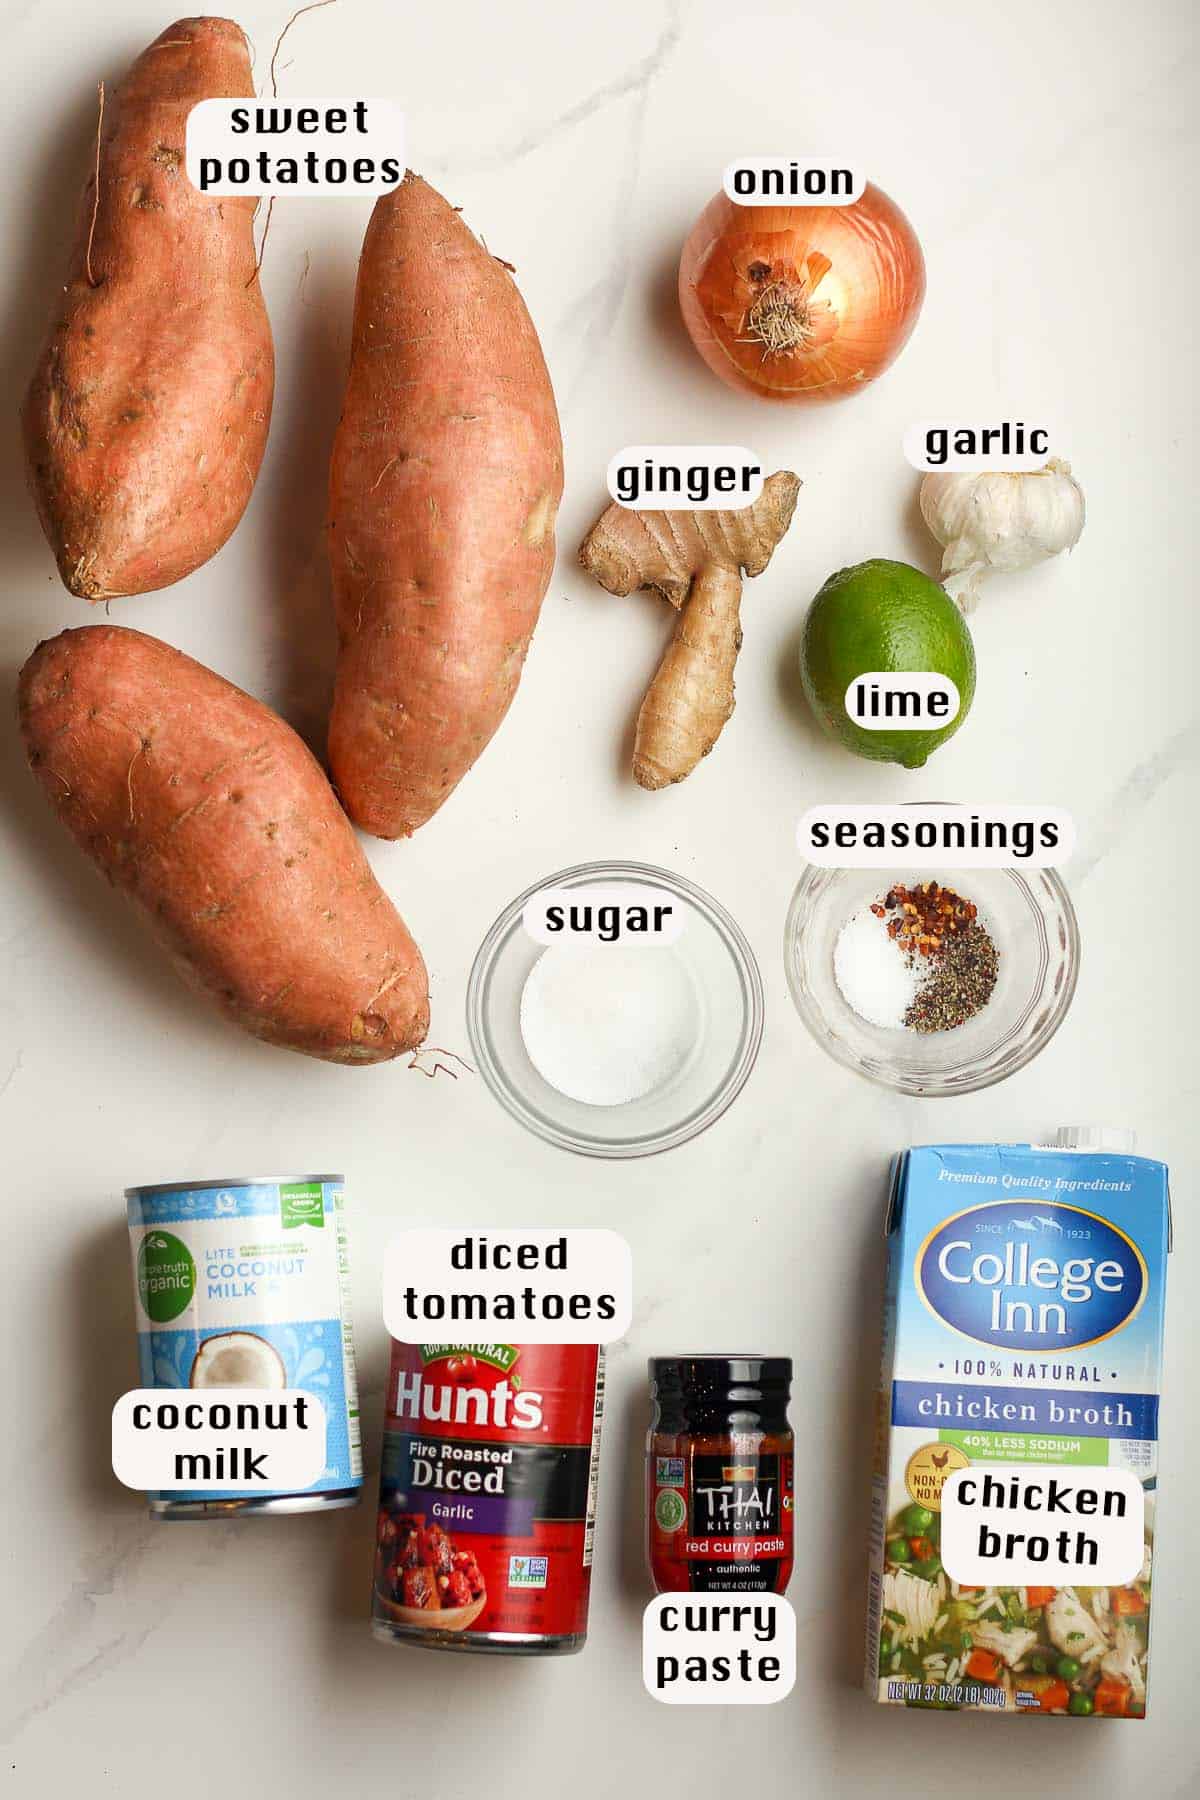 The ingredients for the soup.